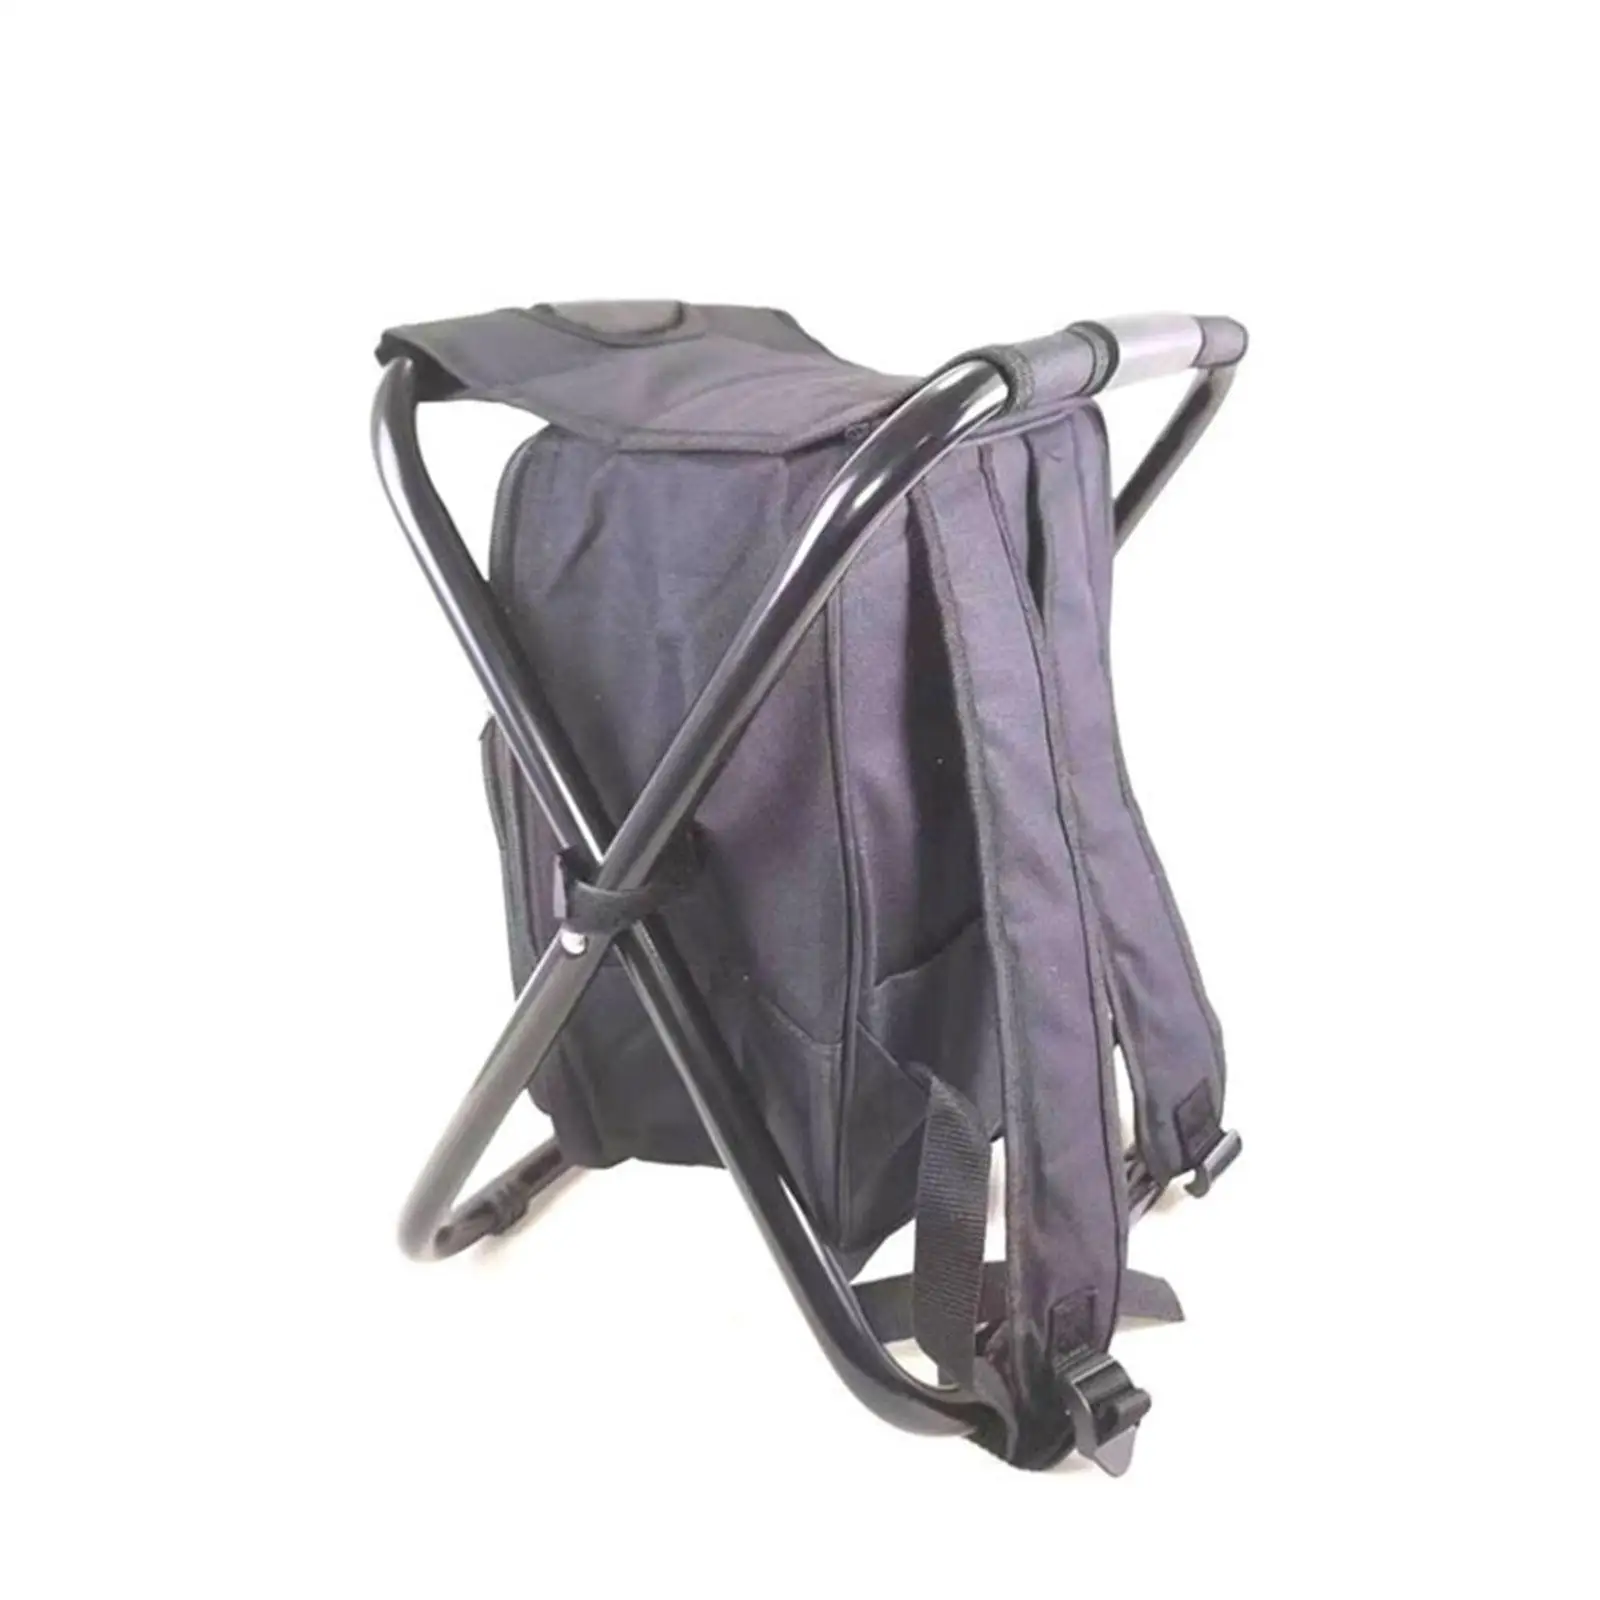 Backpack Chairs Lightweight Camping Chair Fishing Seat Portable for Camping